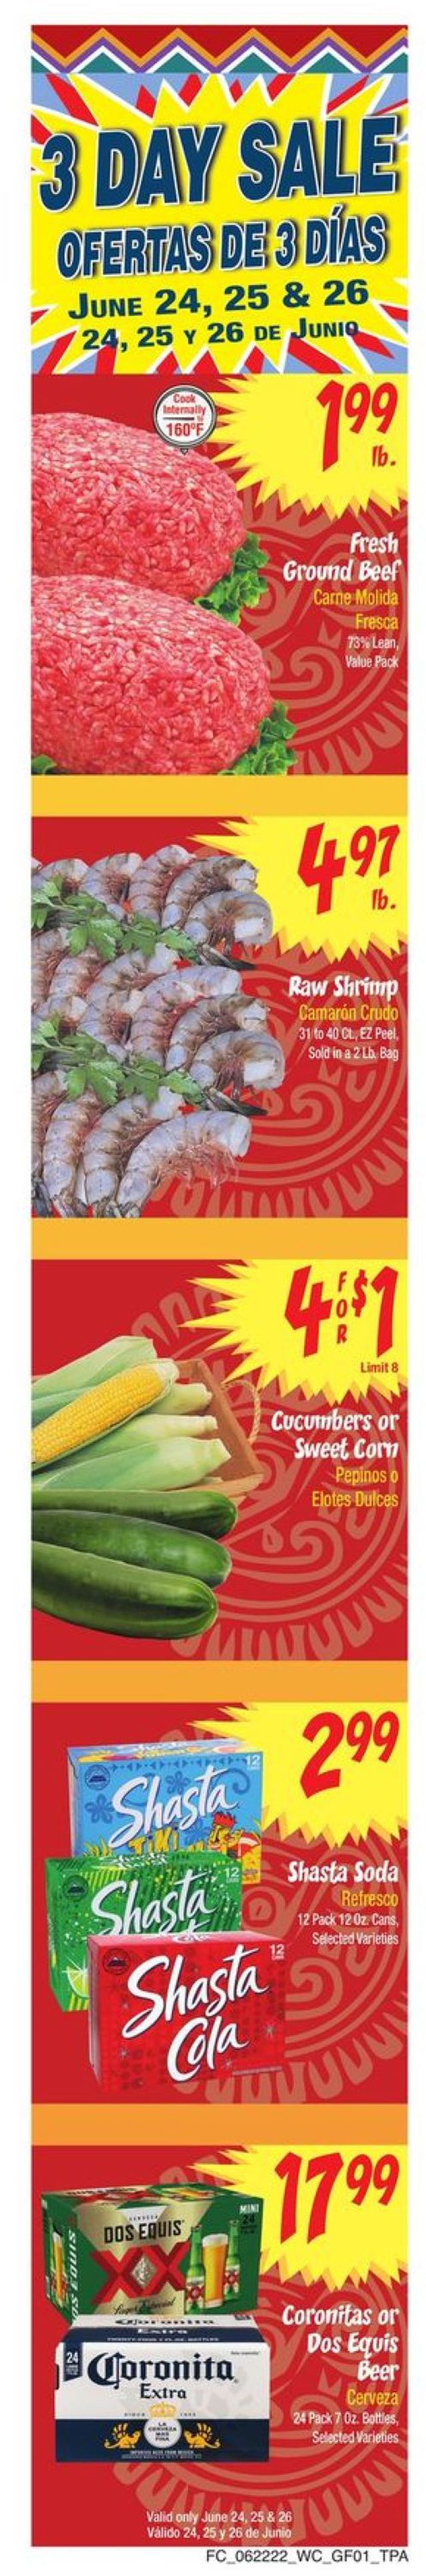 Food City Ad from 06/22/2022